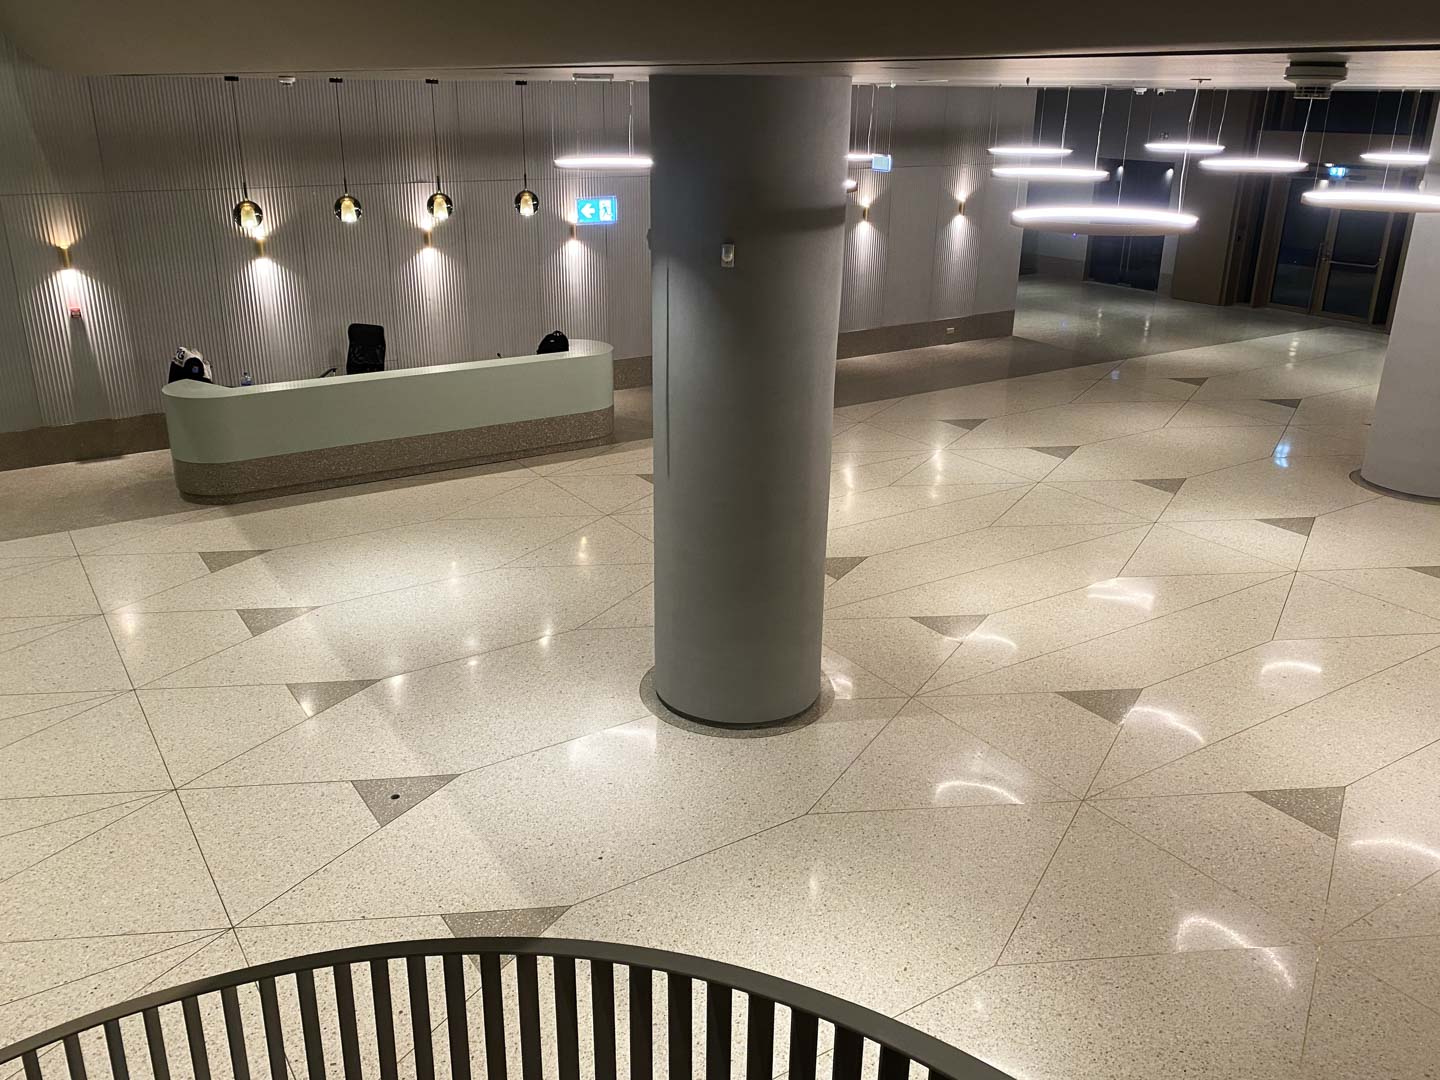 Tandem Office Building - an elegant design with terrazzo in the reception area, lobby lifts, stairs, and covings.